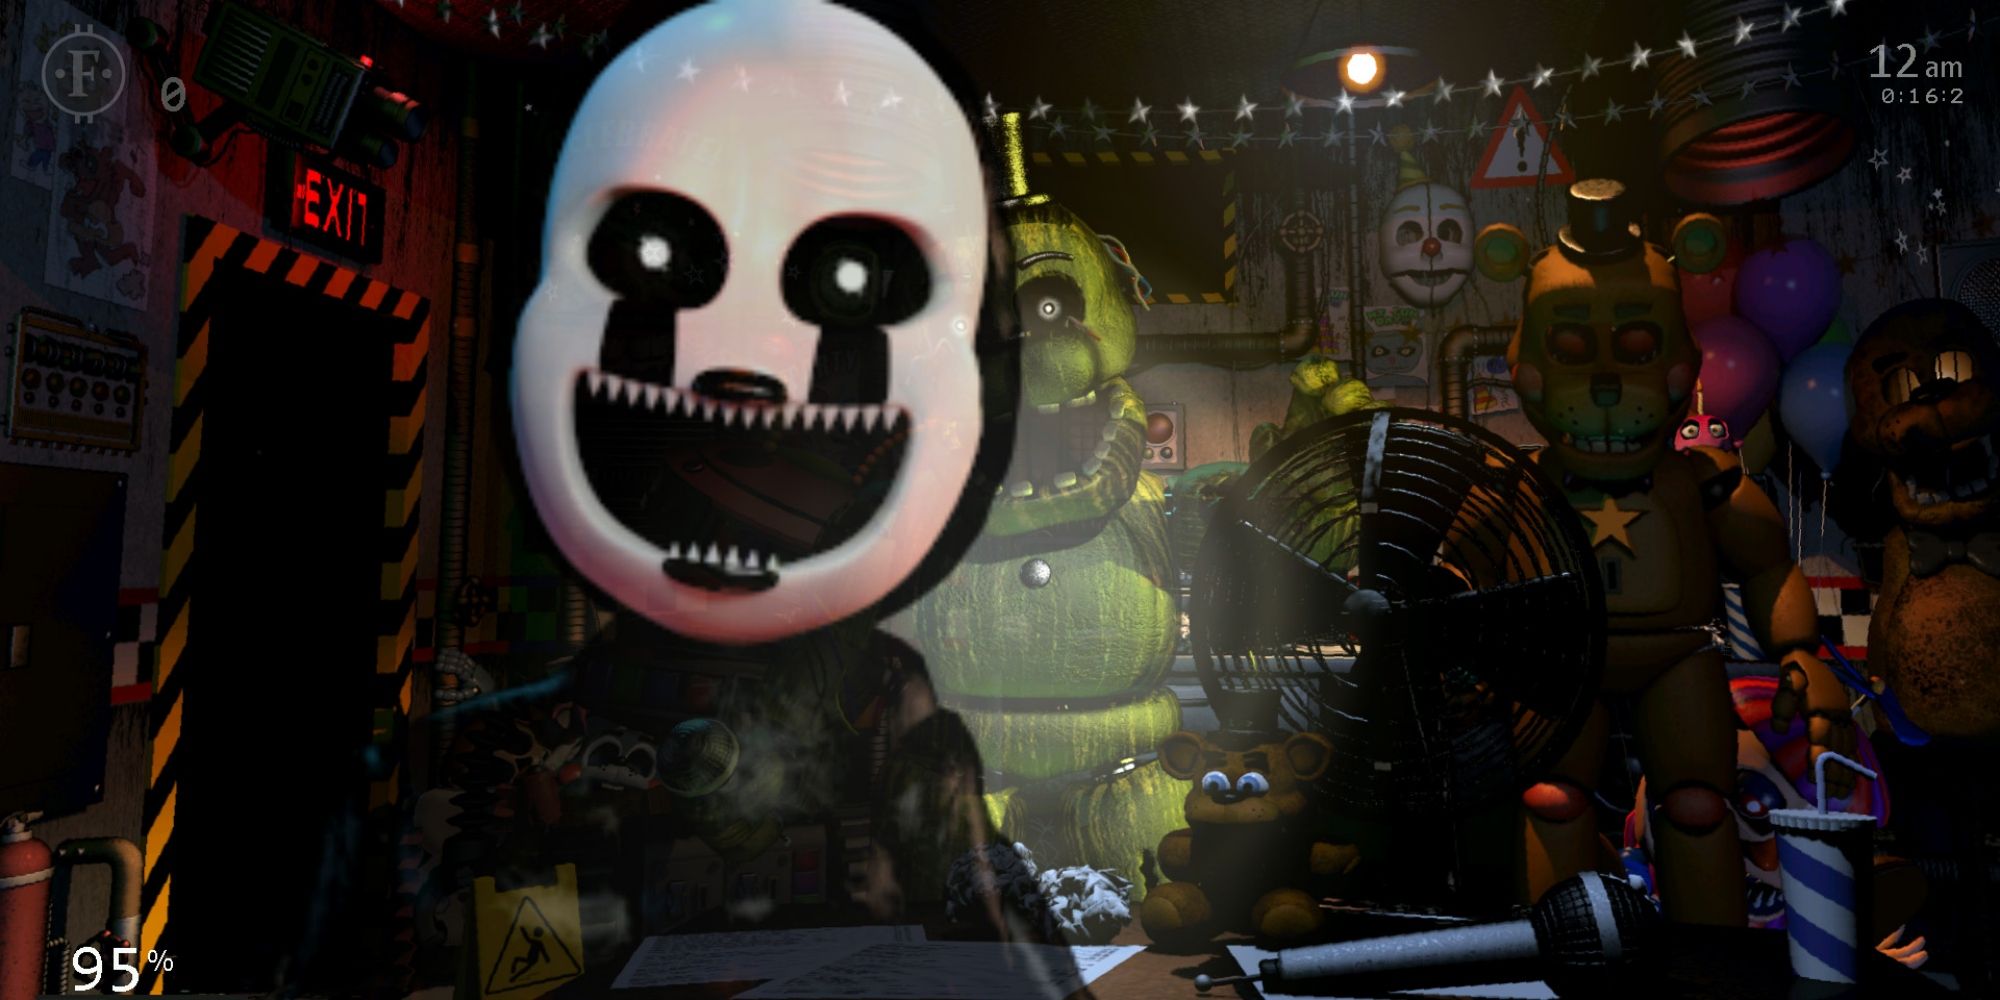 The puppet jumpscares the player as several other animatronics and animatronic suits can be seen in the background